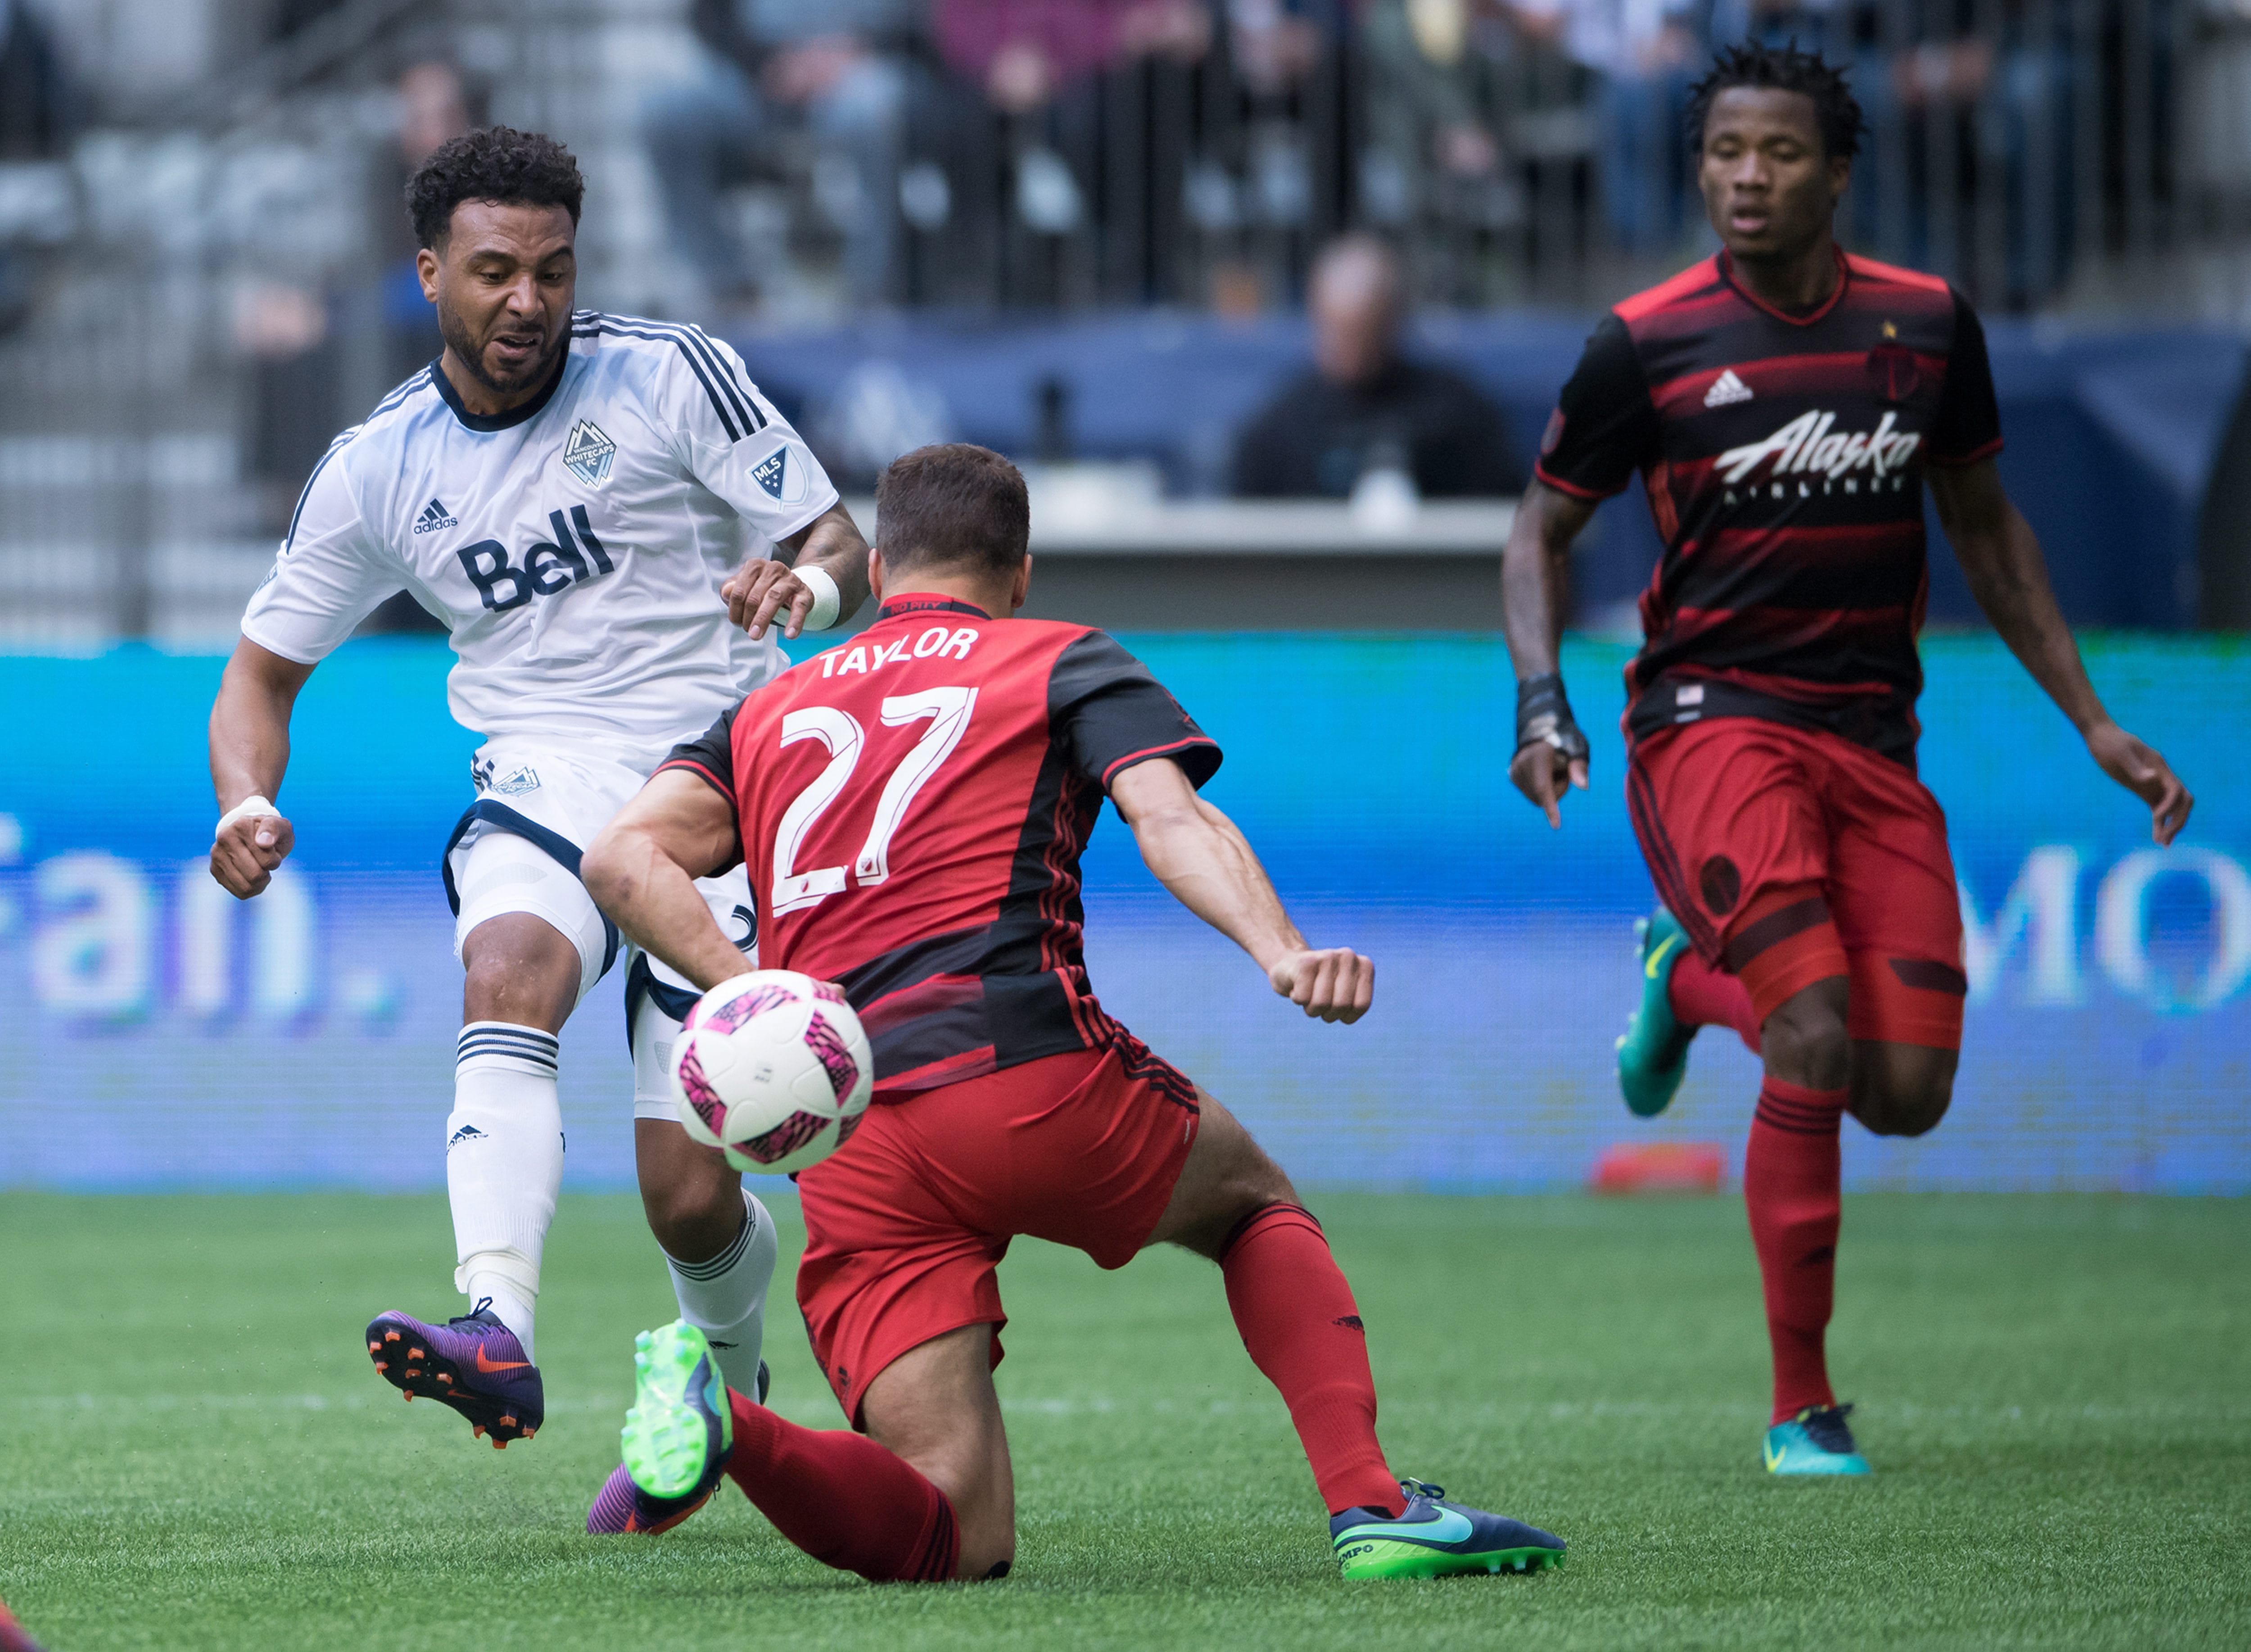 Vancouver Whitecaps' Giles Barnes, left, puts the ball past Portland Timbers' Steven Taylor (27) and scores a goal as Alvas Powell, right, watches during the first half of an MLS soccer game in Vancouver, British Columbia, on Sunday Oct. 23, 2016.